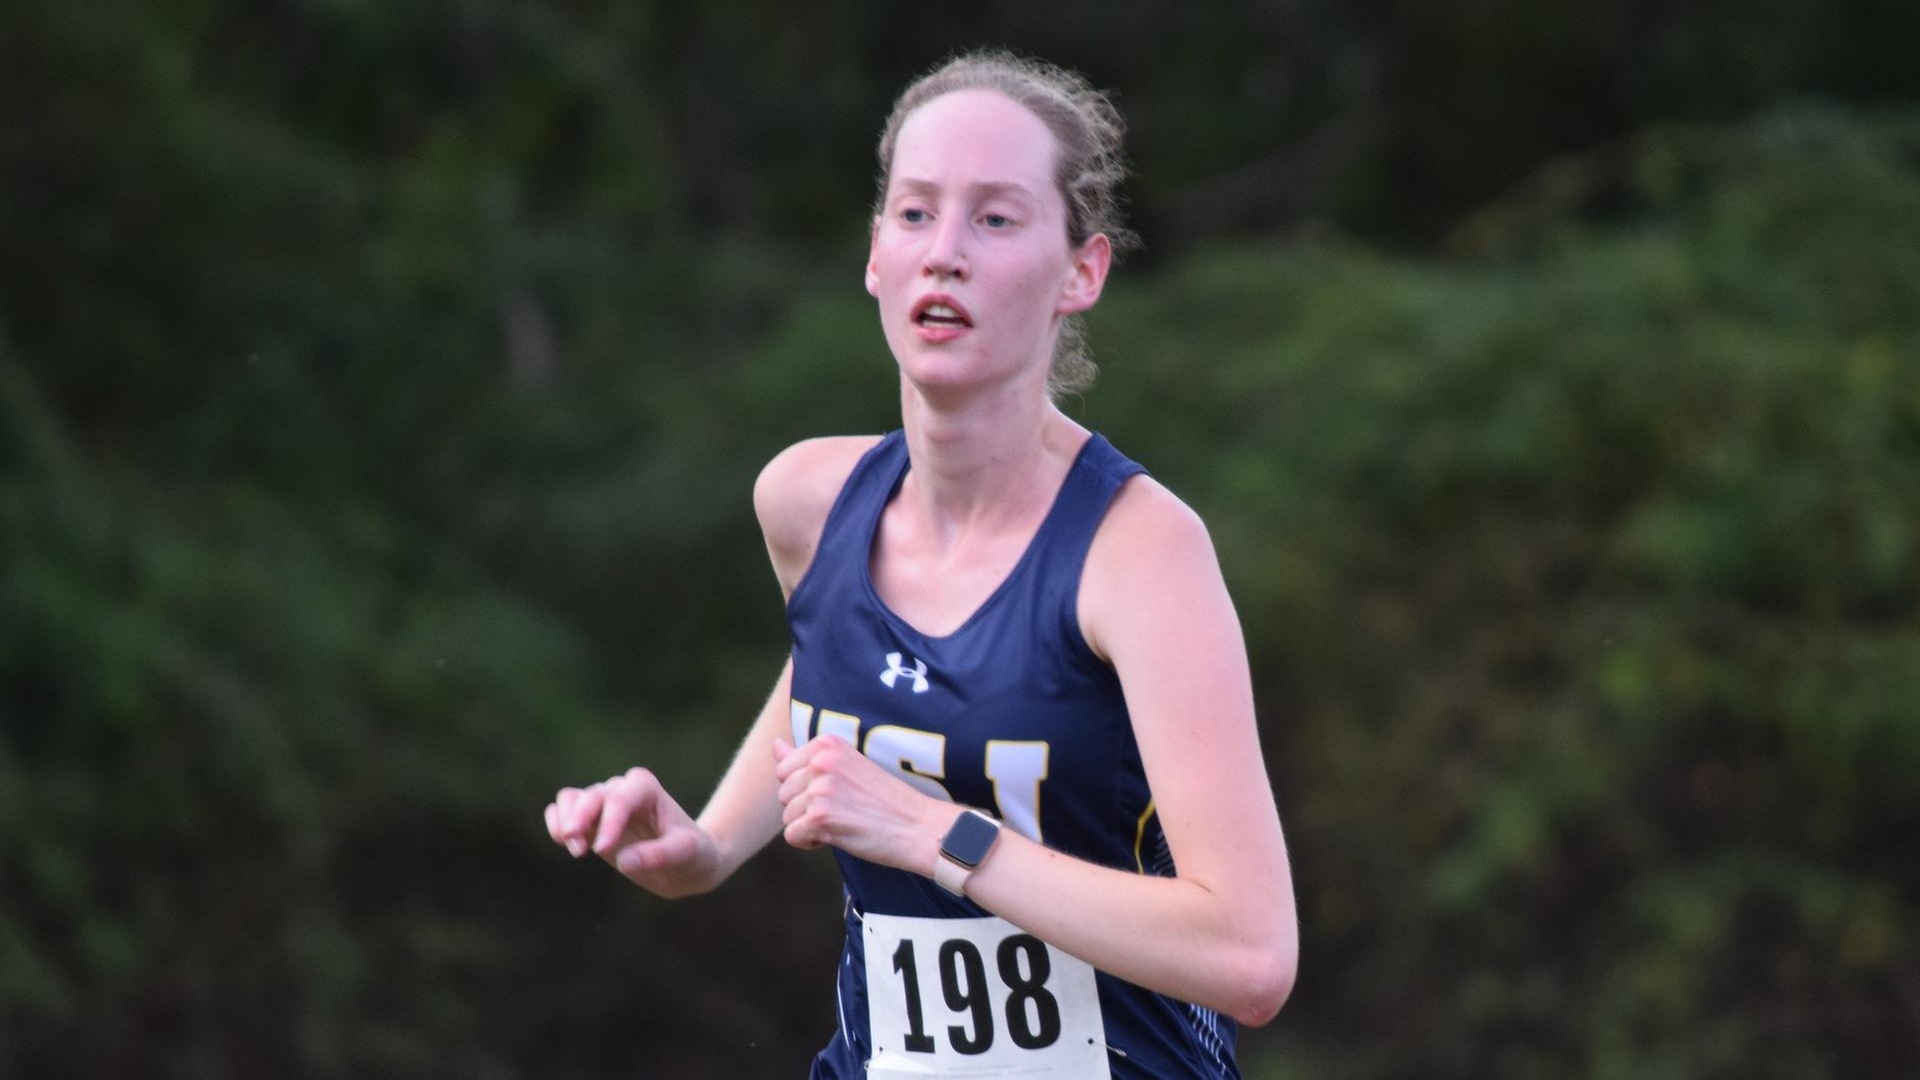 Shores Leads Women's Cross Country at Founding Tree Invitational